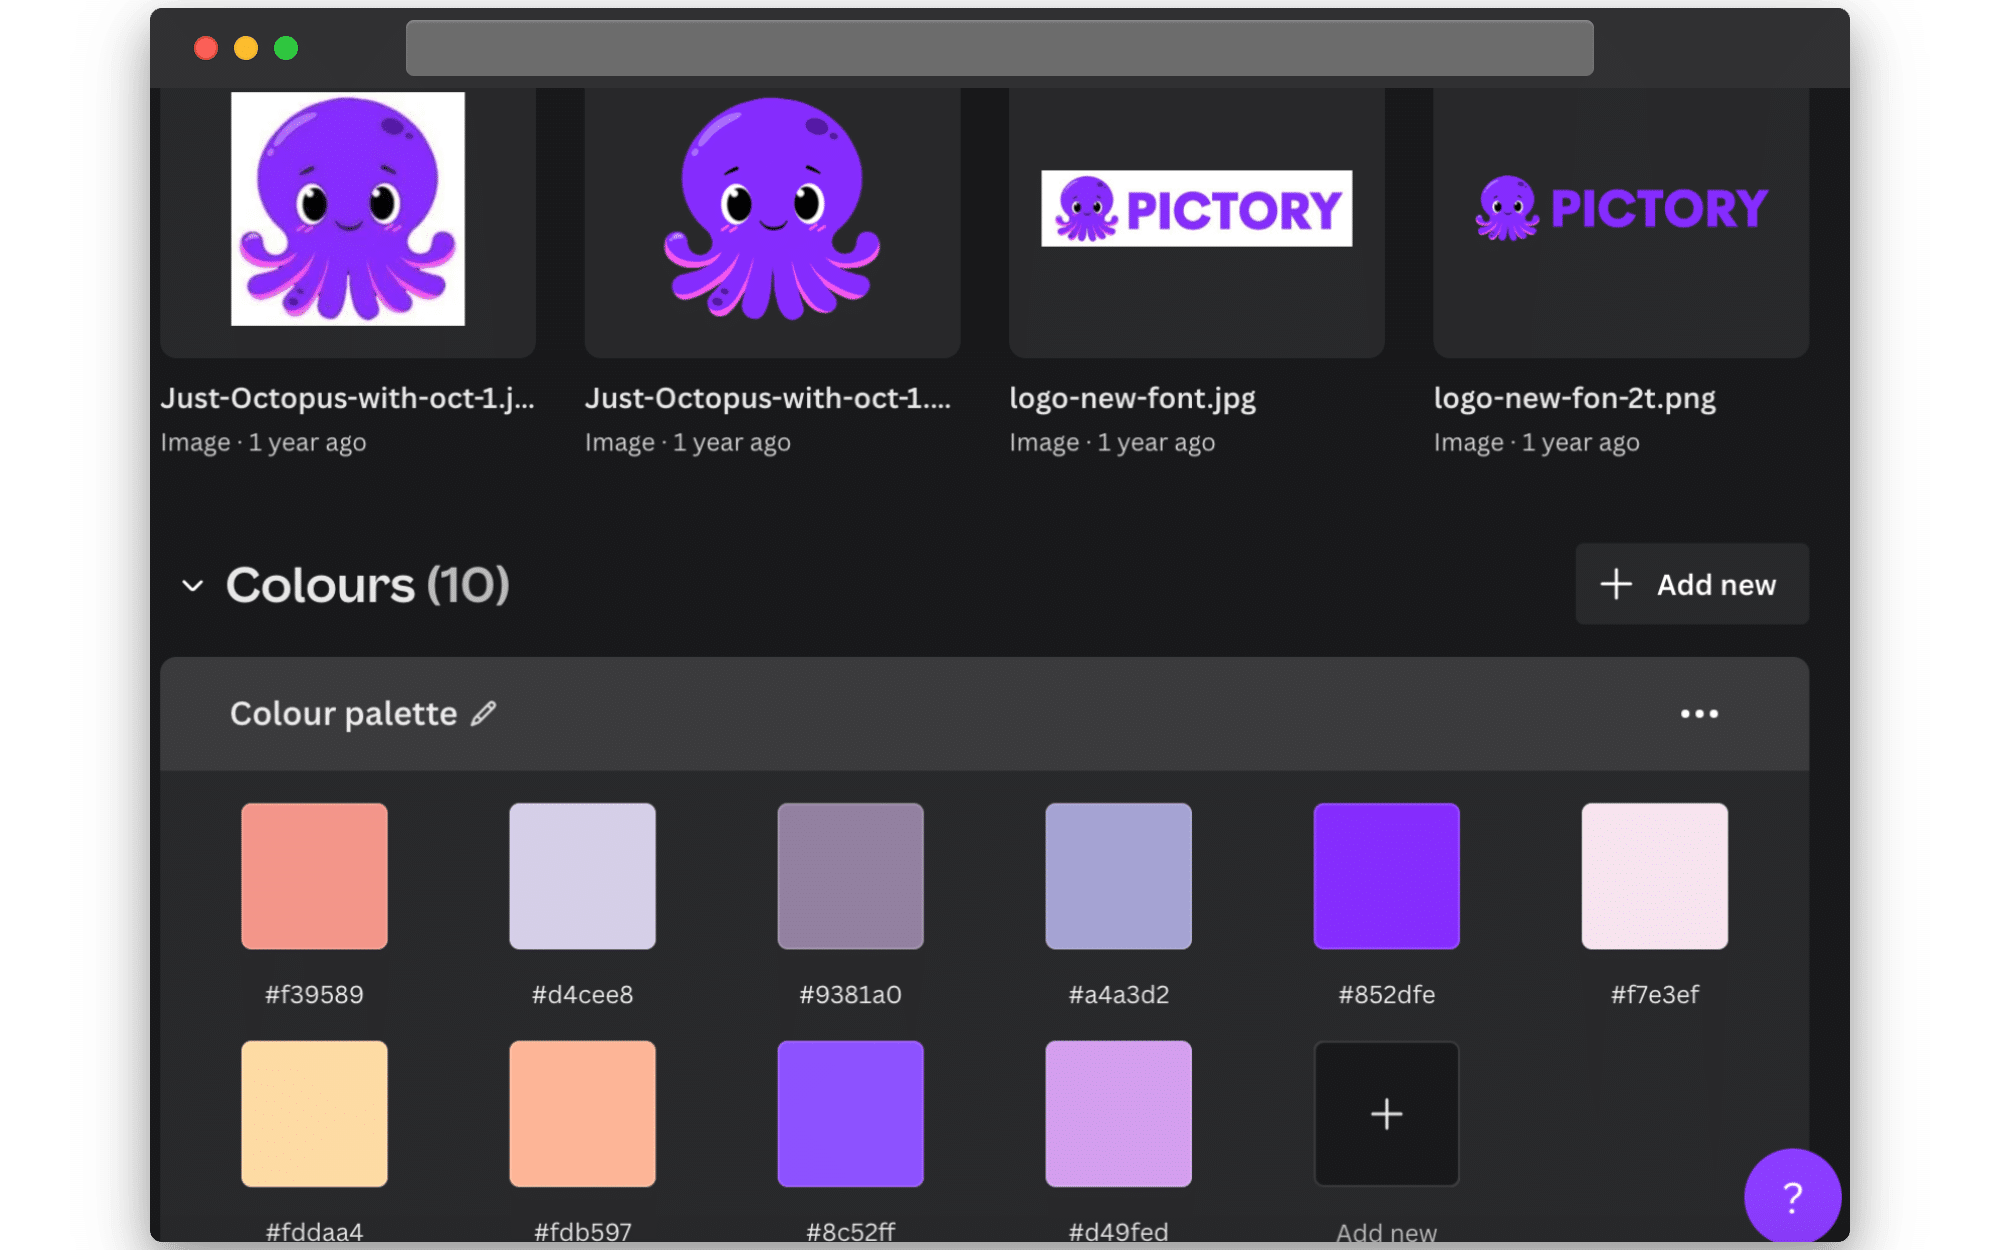 Here's an image showing some of Pictory's brand colours and graphics.